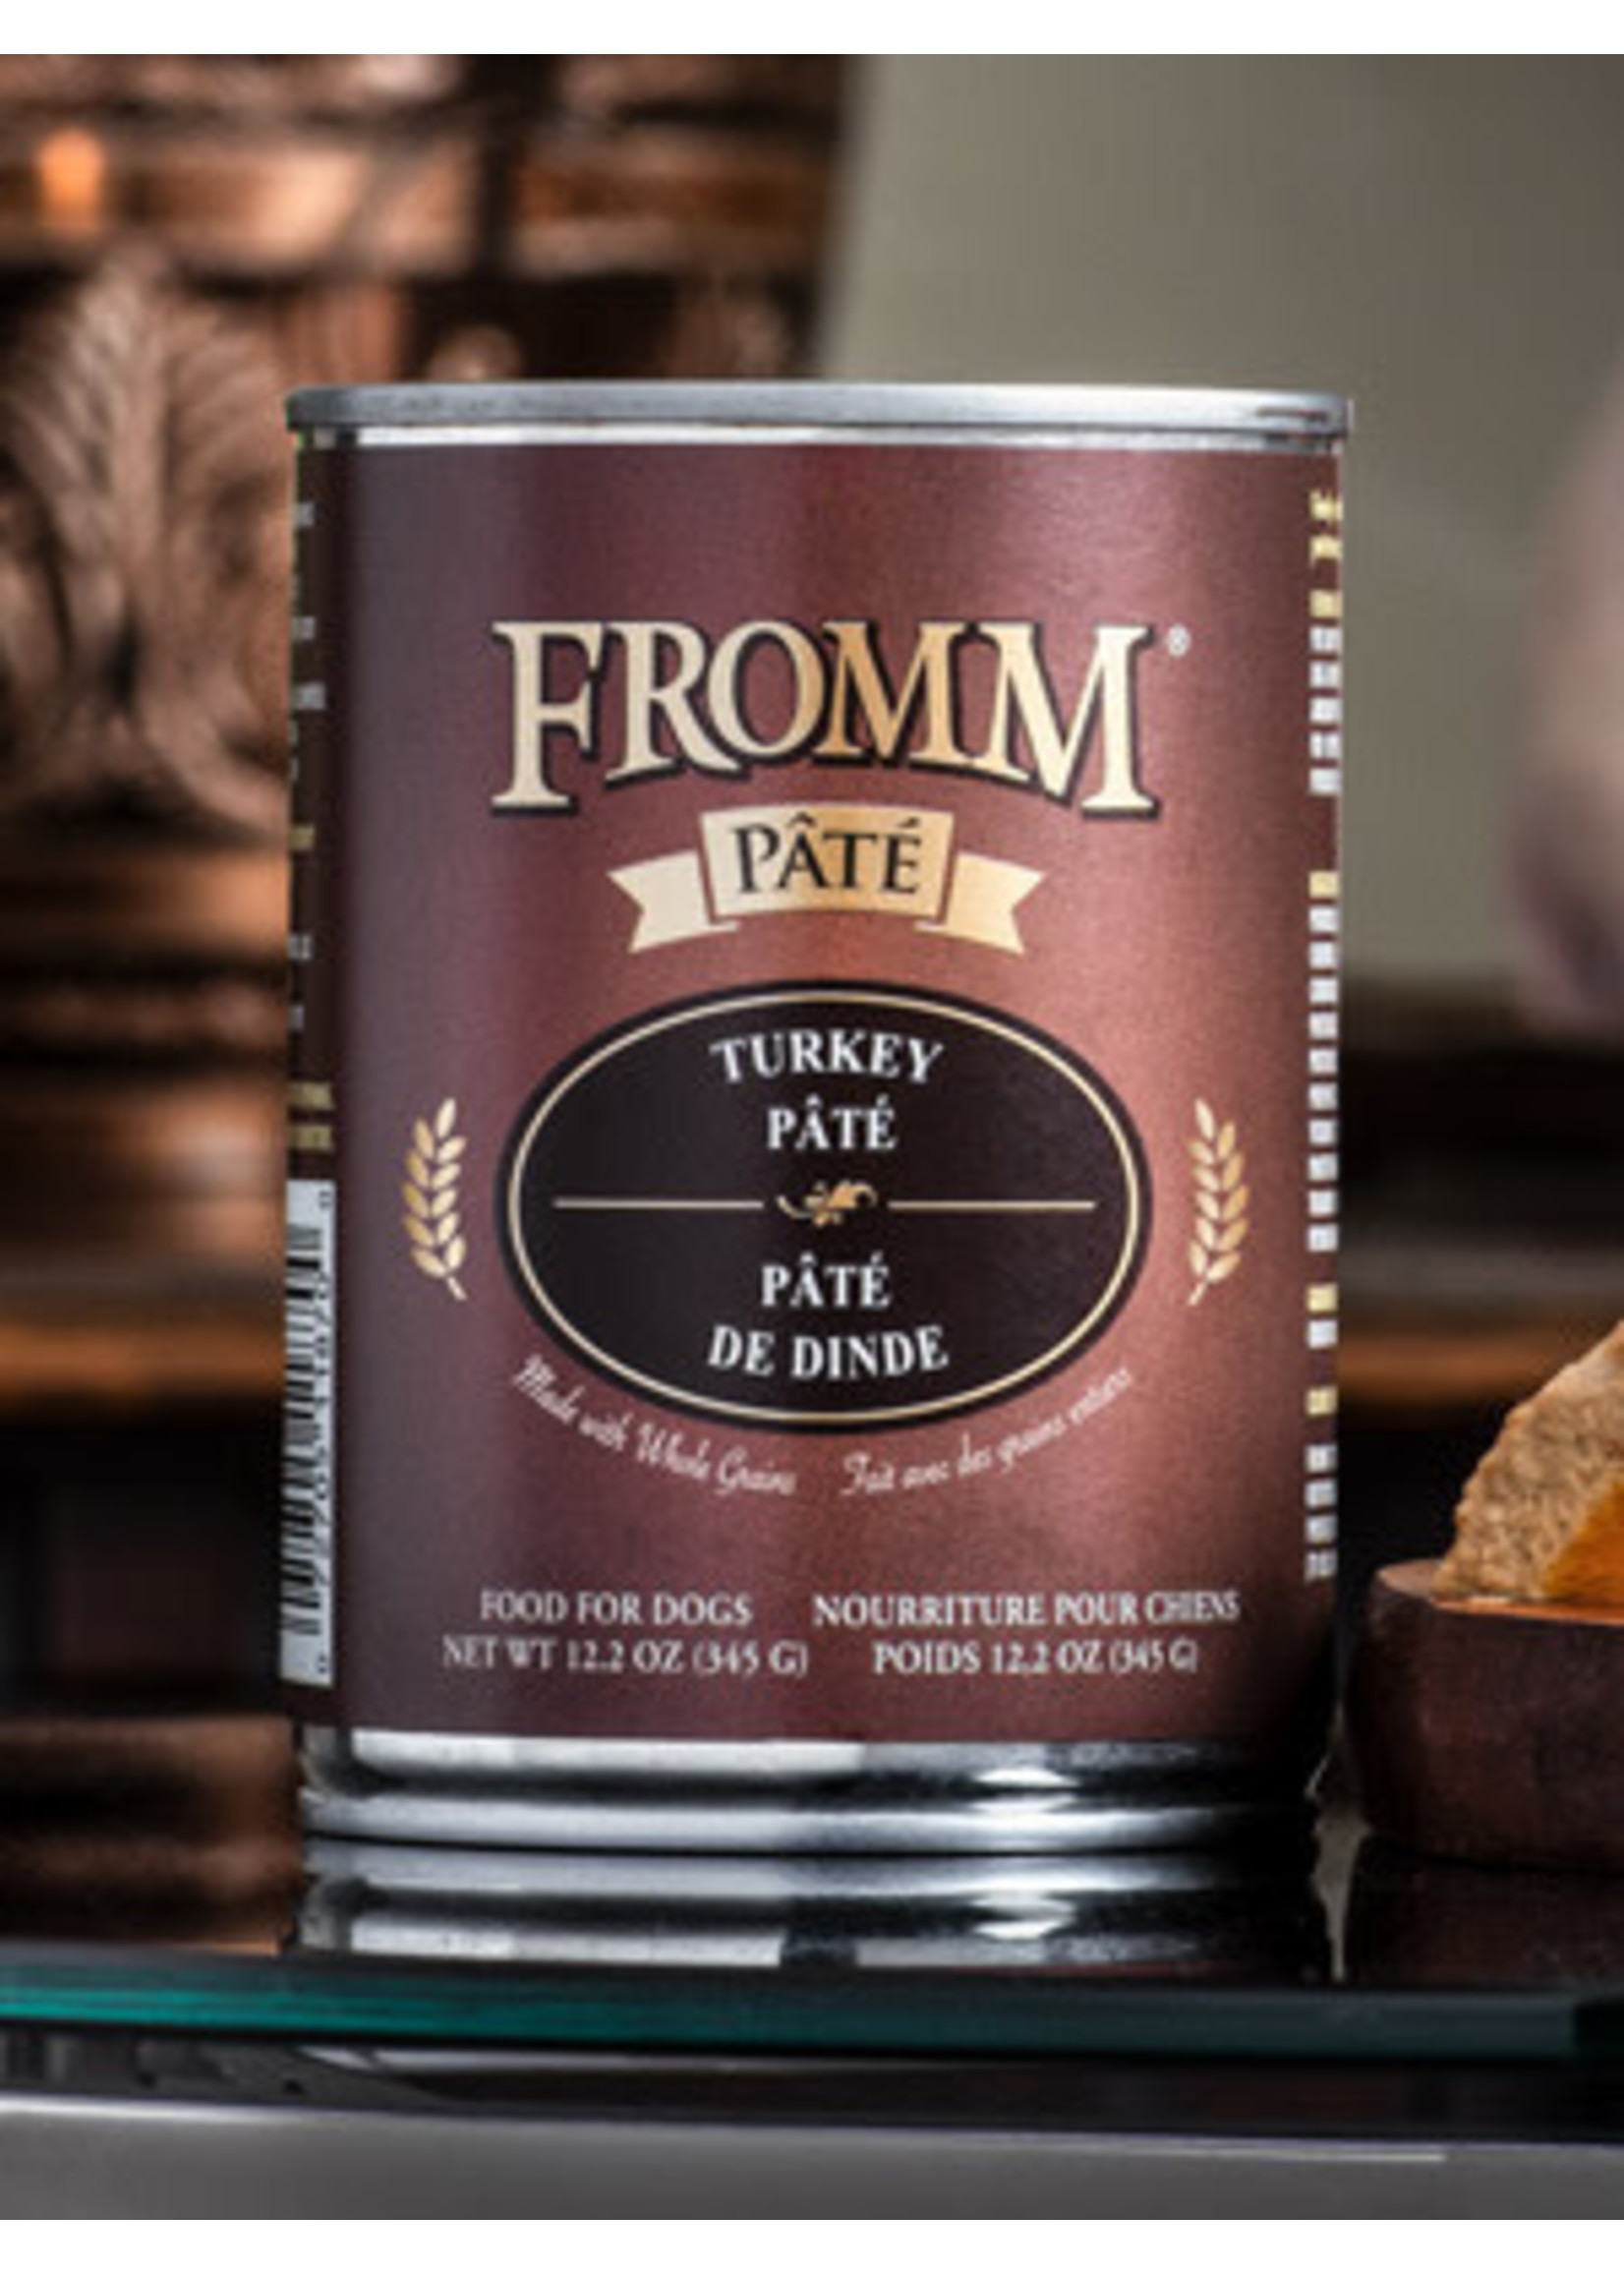 Fromm Family Turkey Pate' 12.2 oz